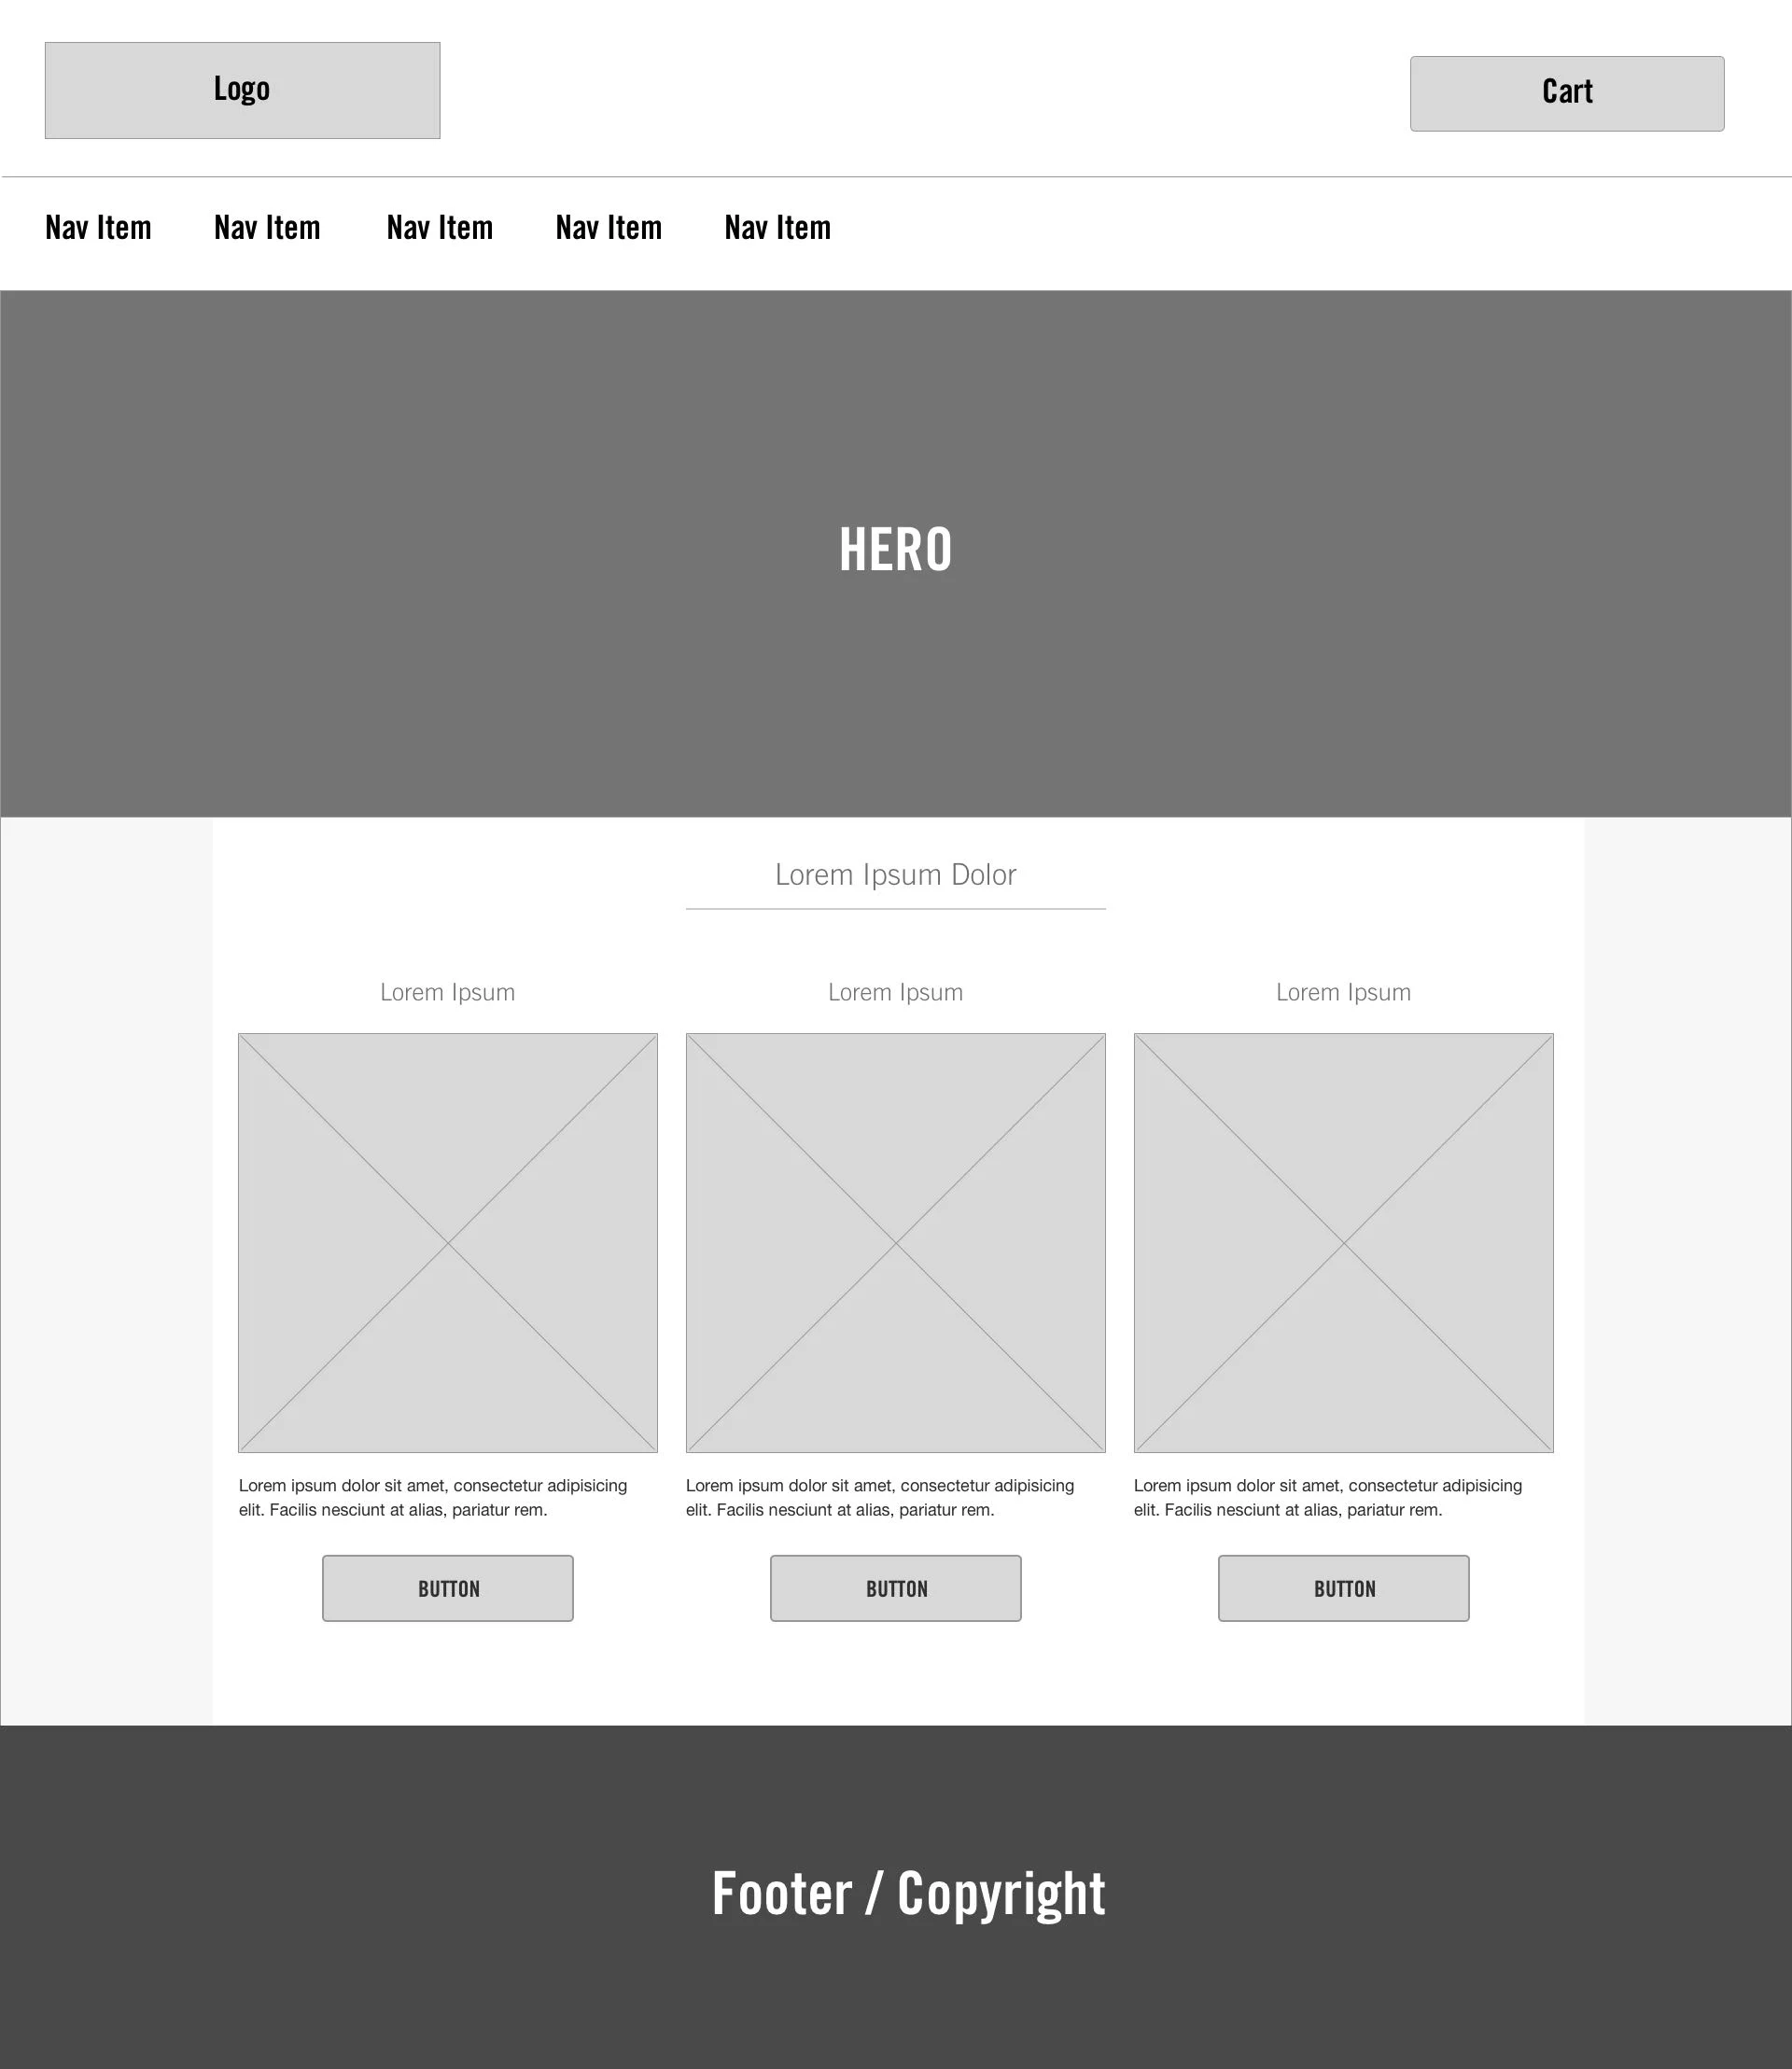 Wireframe - Domino's Low Fidelity Vehicle Graphics Landing Page